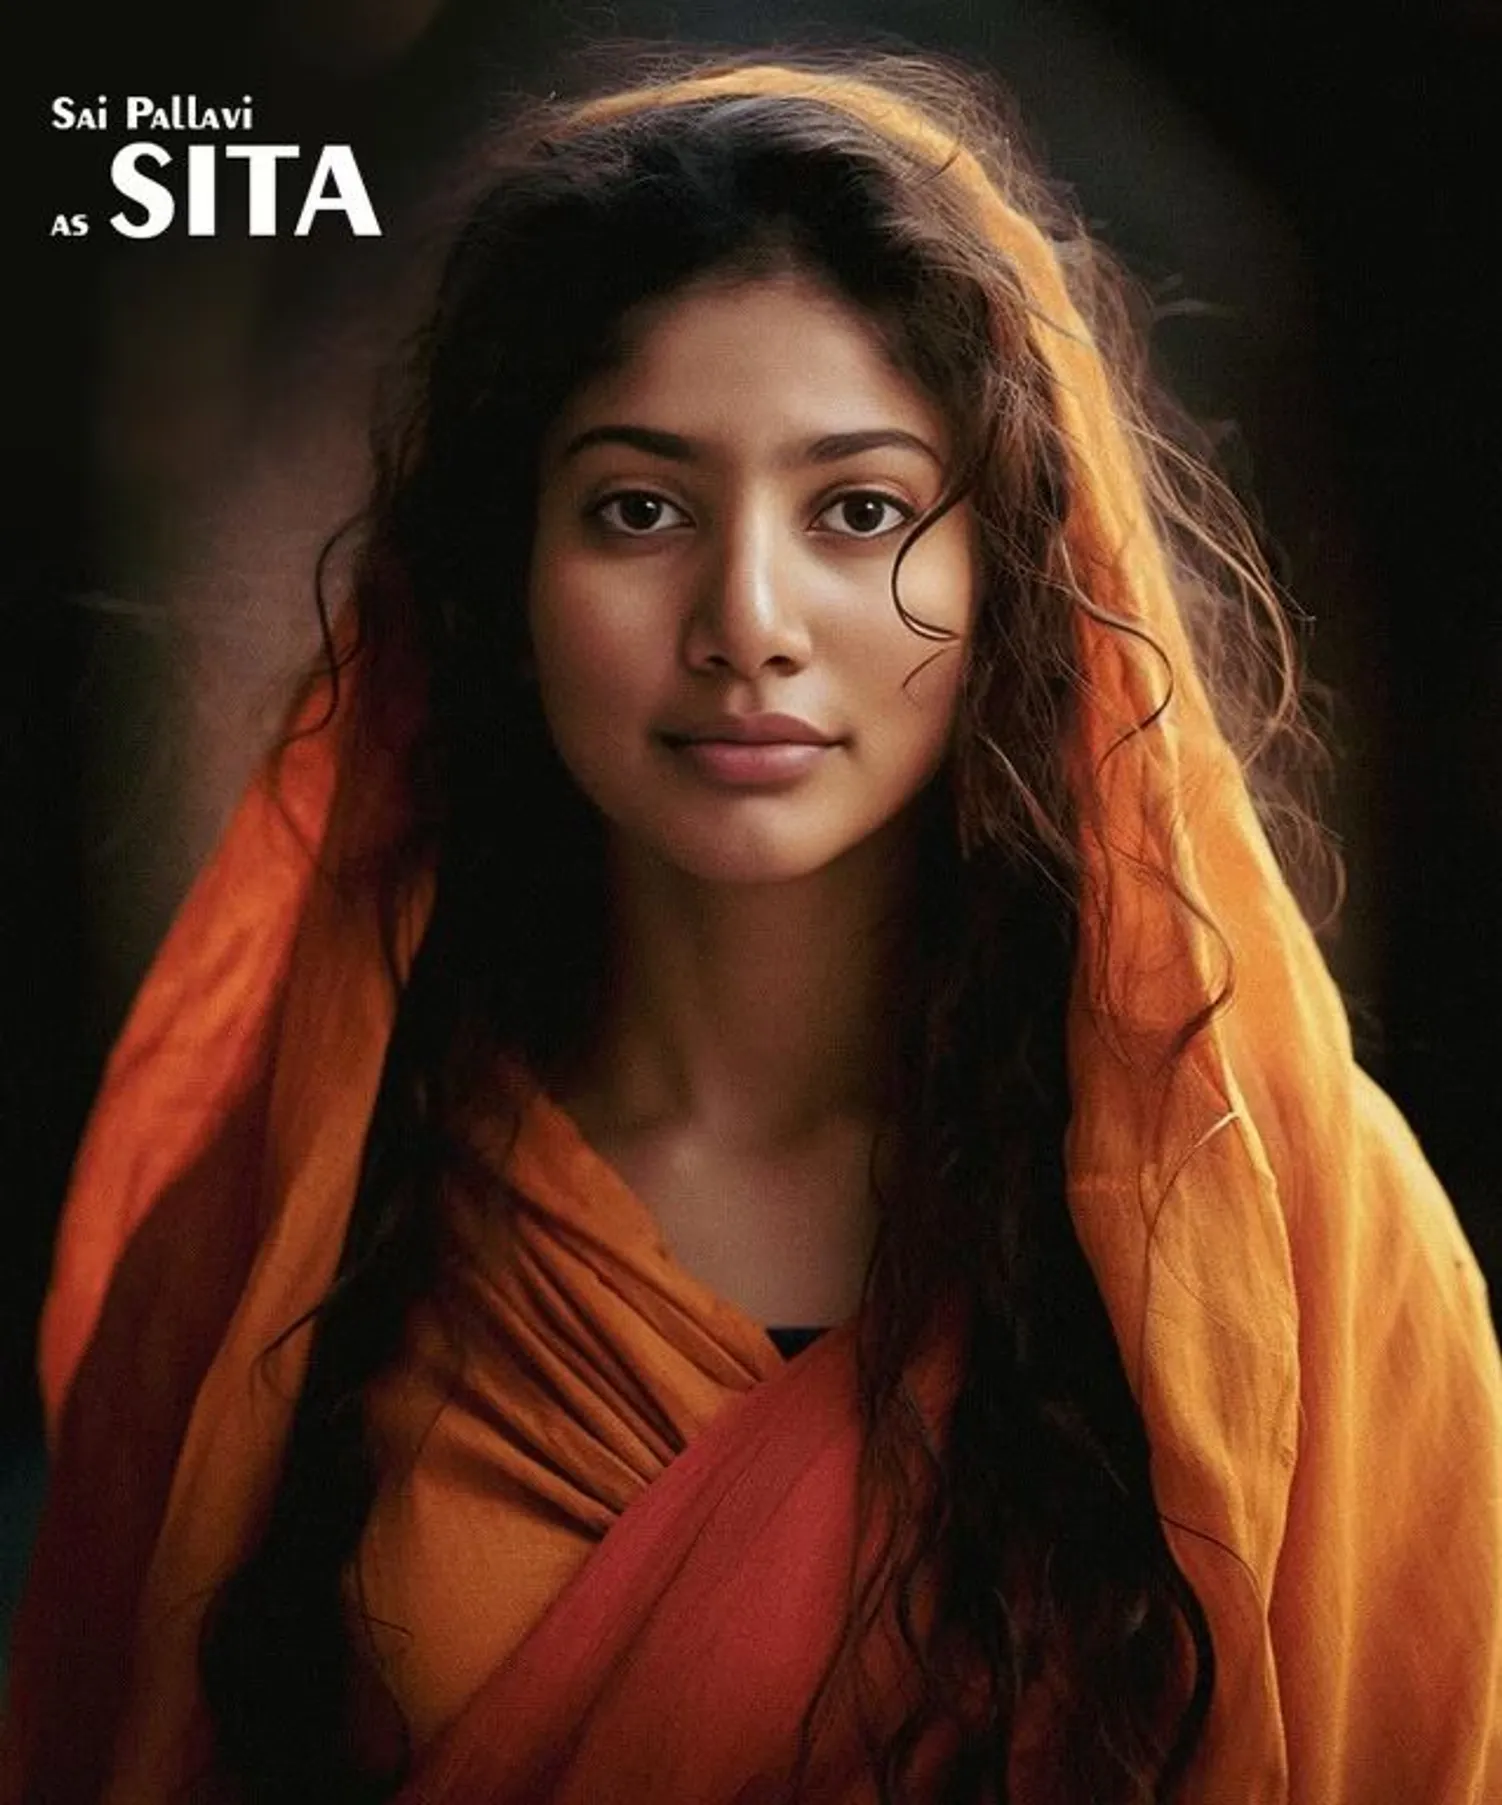 Sai Pallavi is now finalized for the role of Sita